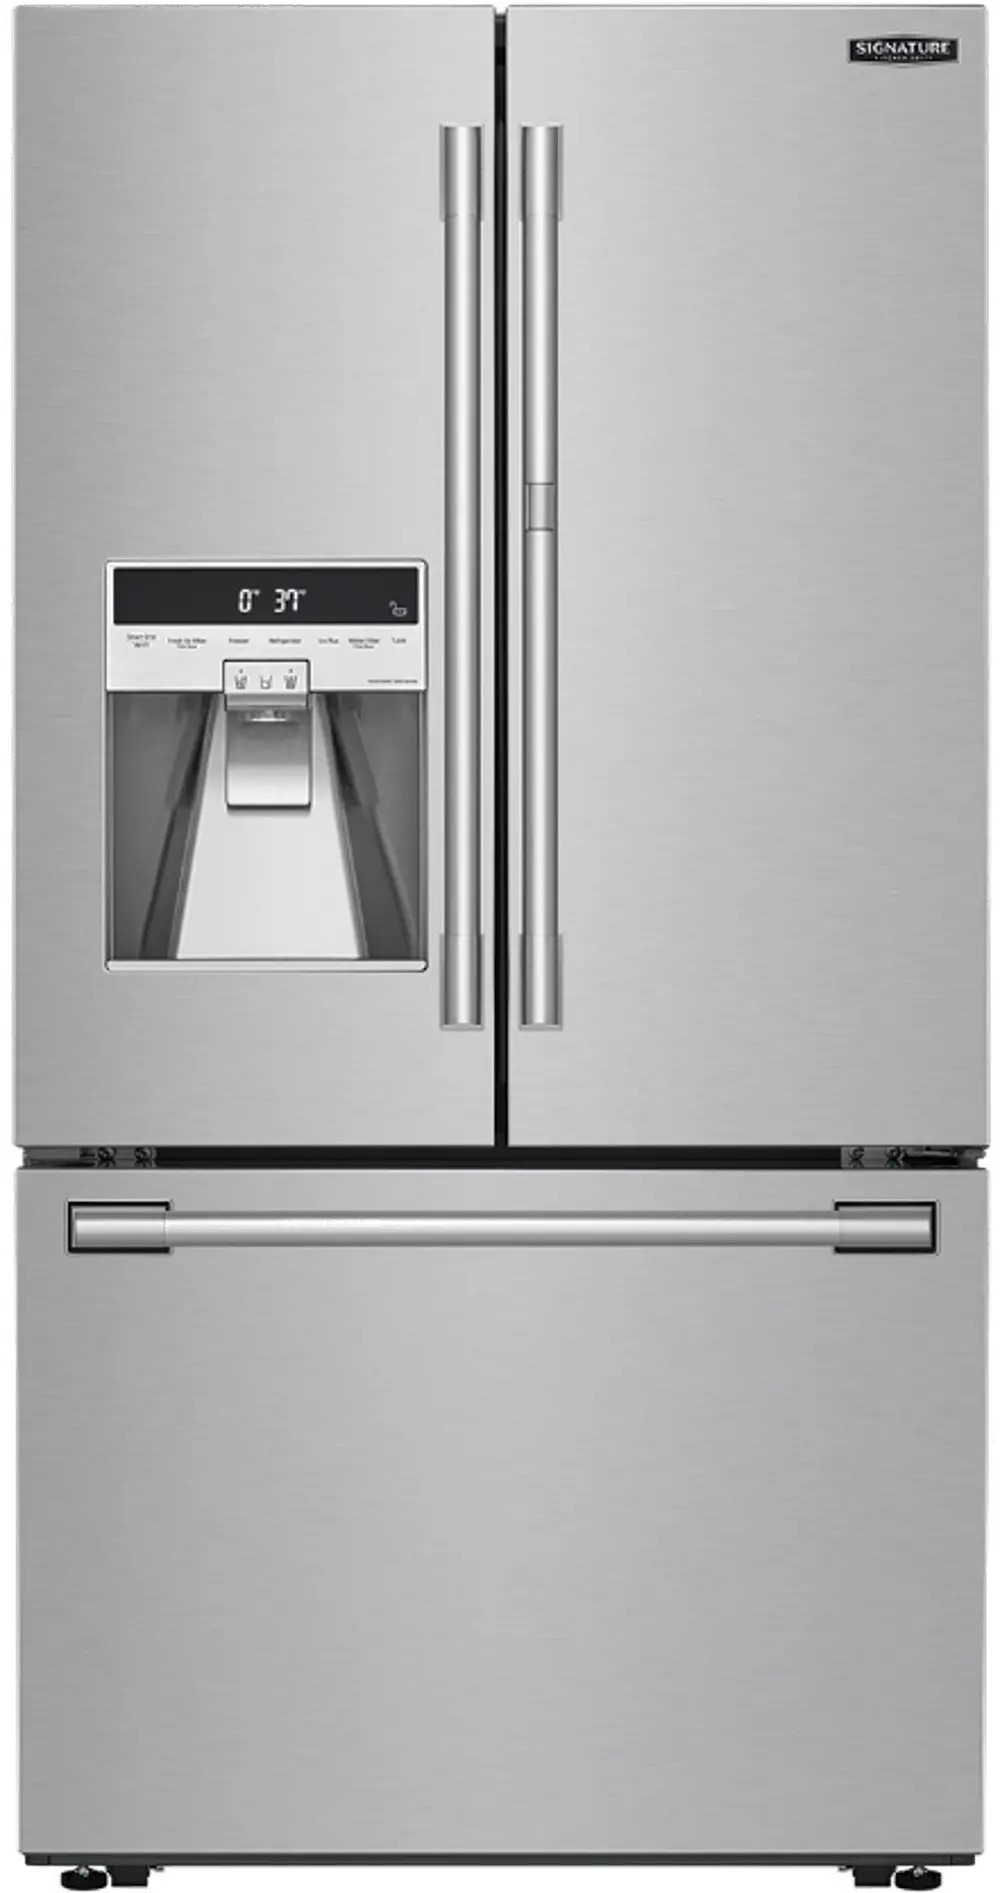 LG Signature Kitchen 23.5 cu ft French Door Refrigerator - Stainless Steel-1